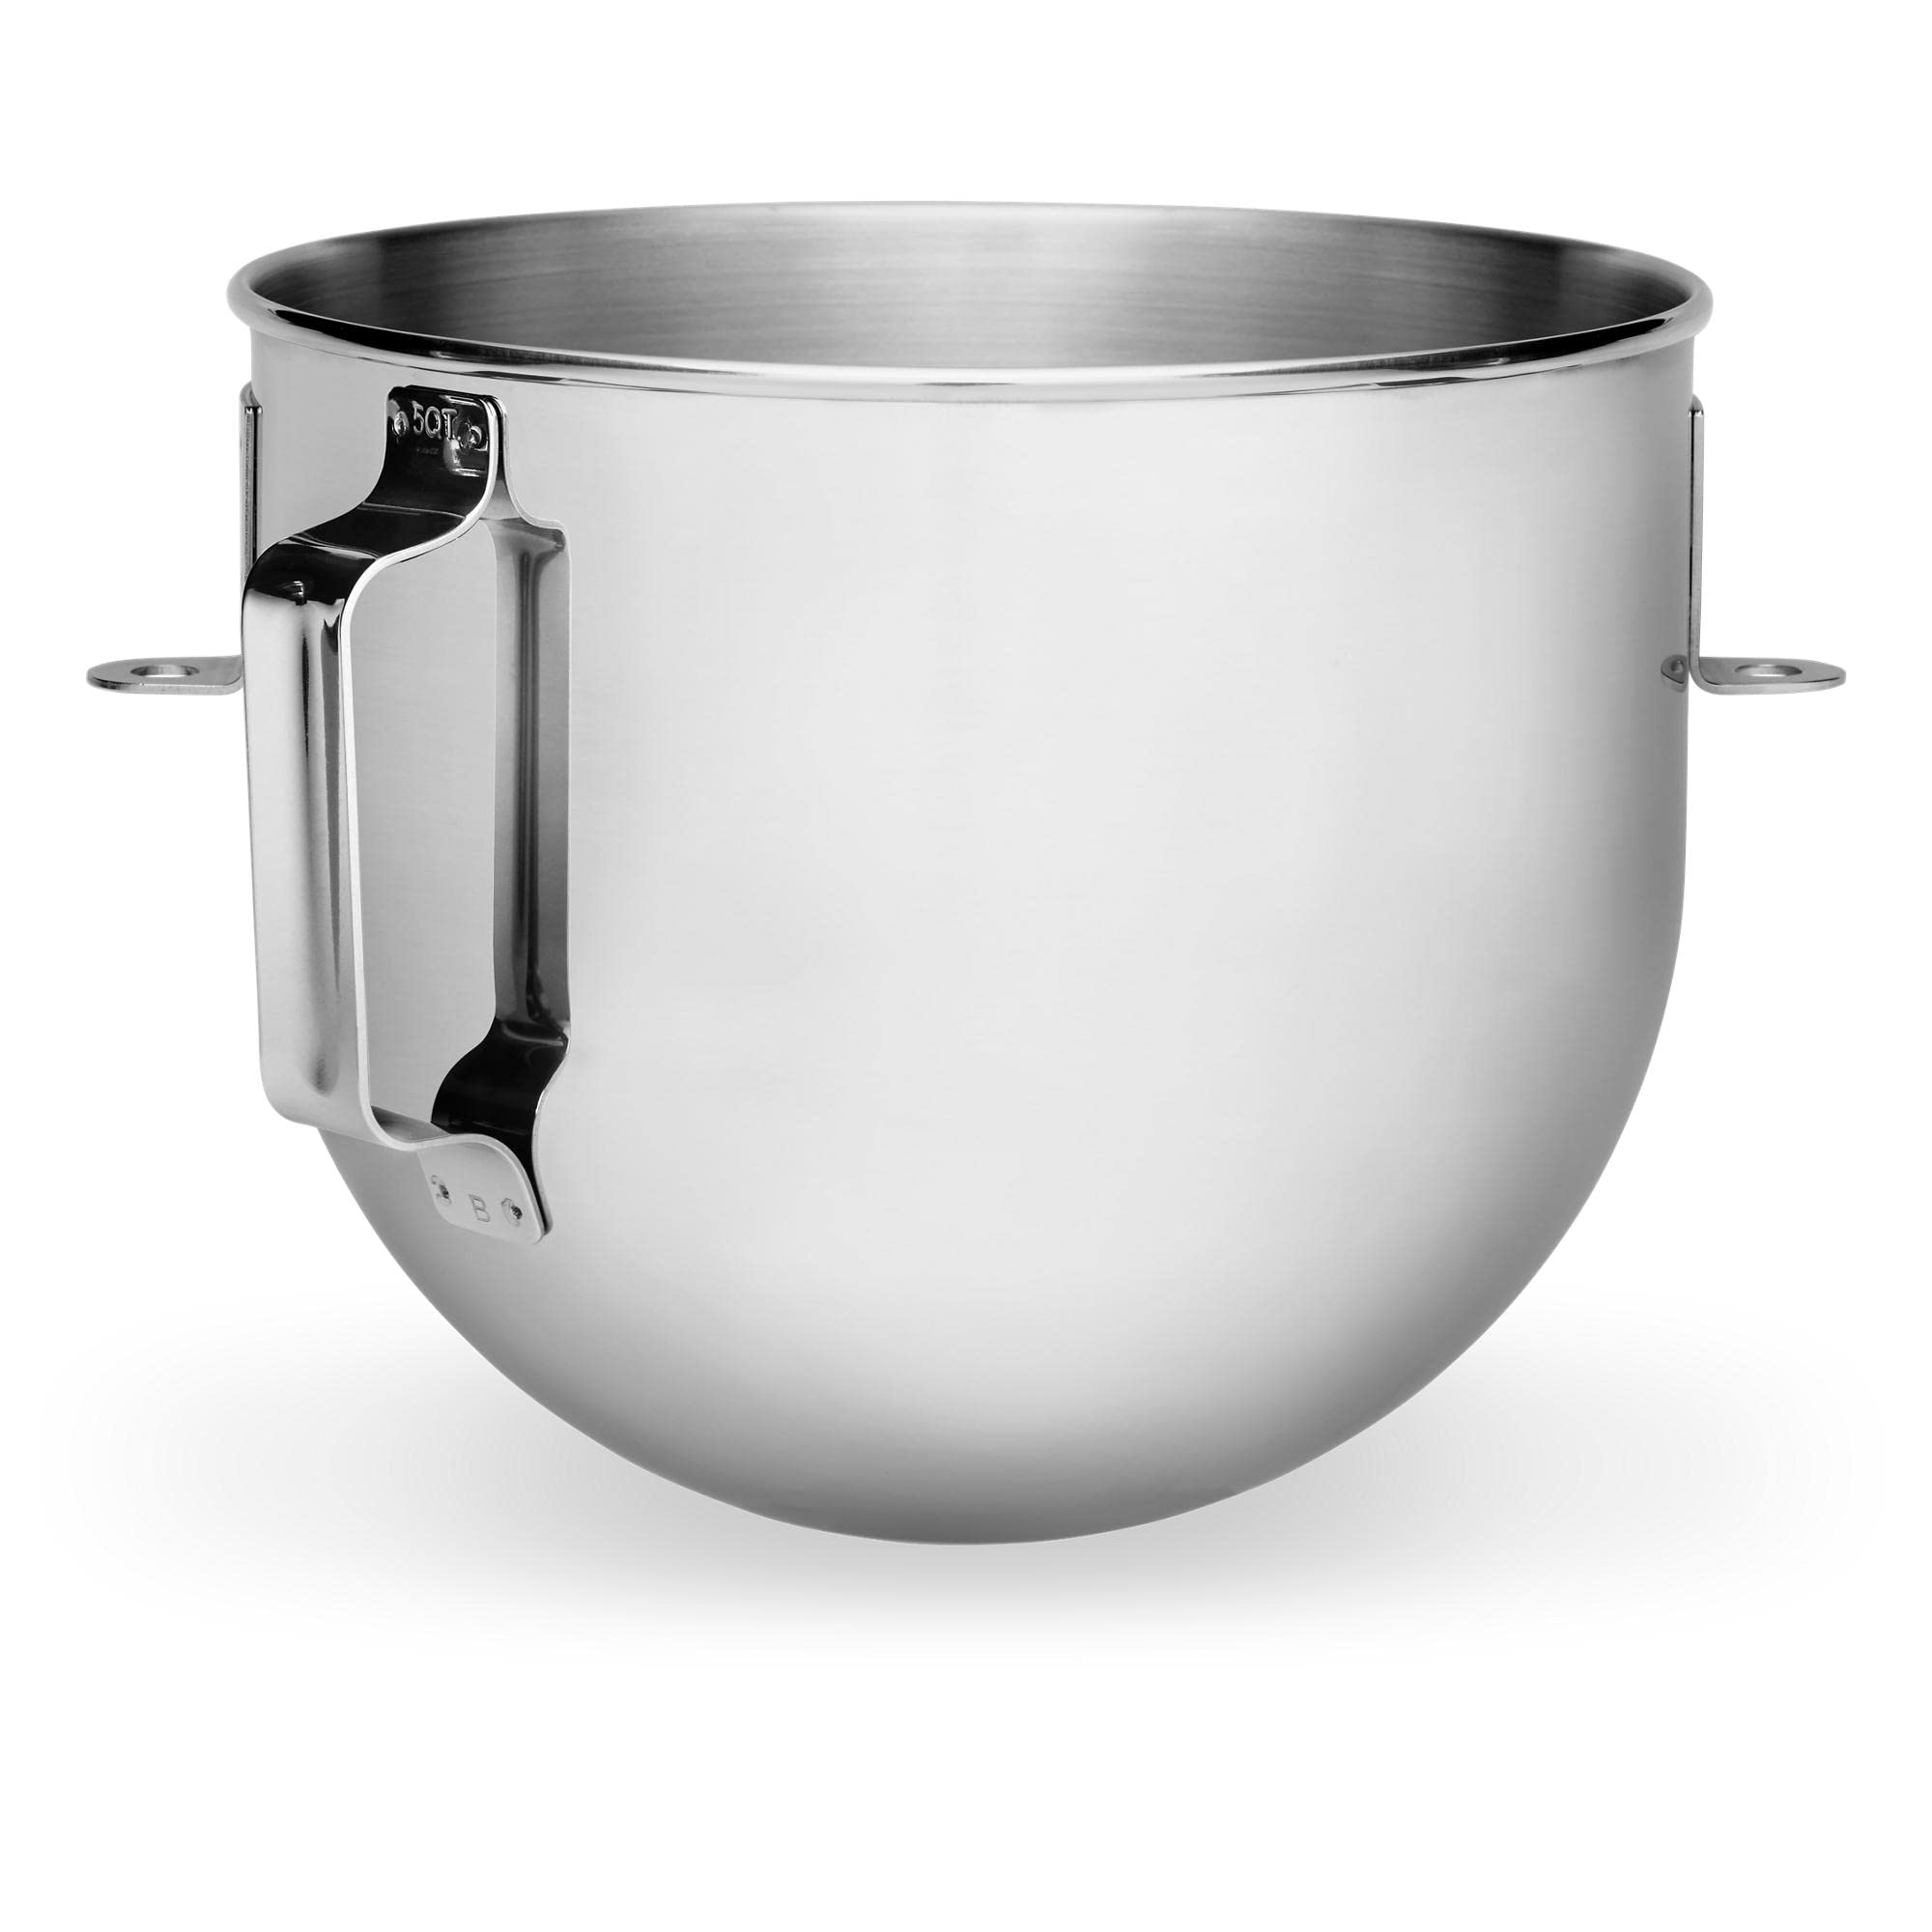 KitchenAid 5 Quart Bowl-Lift Polished Stainless Steel Bowl with Flat Handle - K5ASBP,Silver